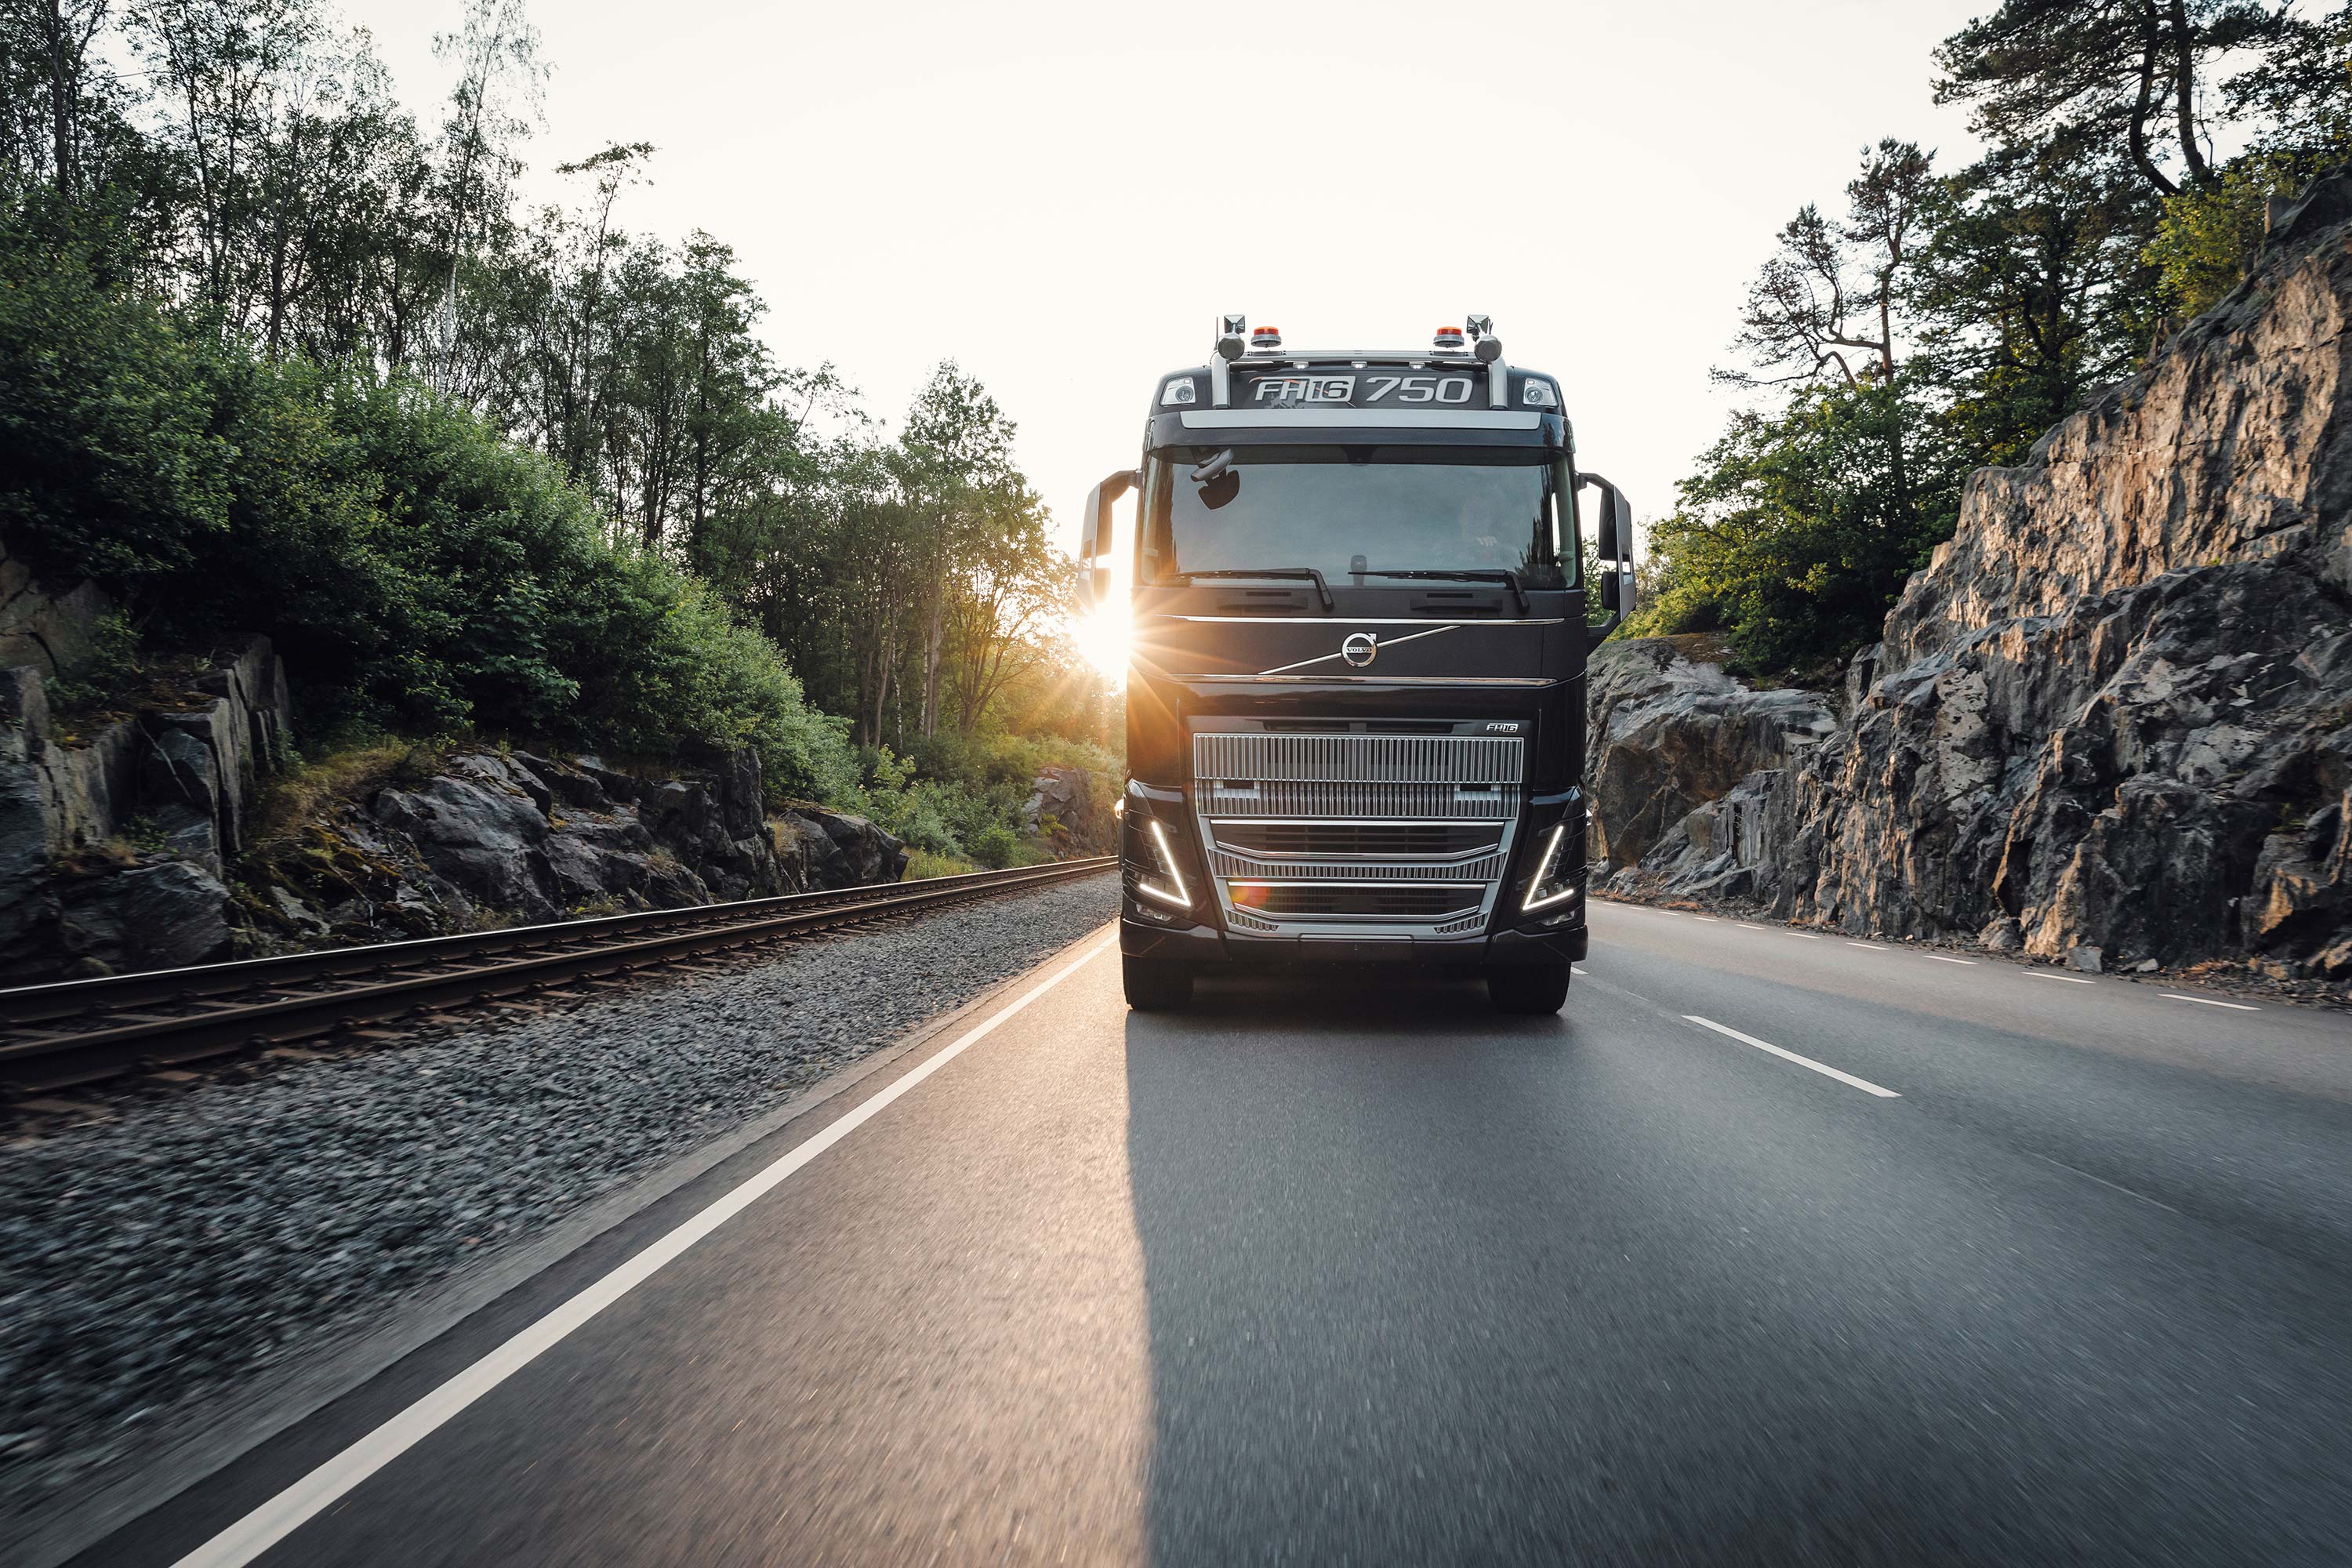 From a distance, it's clear that the Volvo FH16 is our most powerful truck.